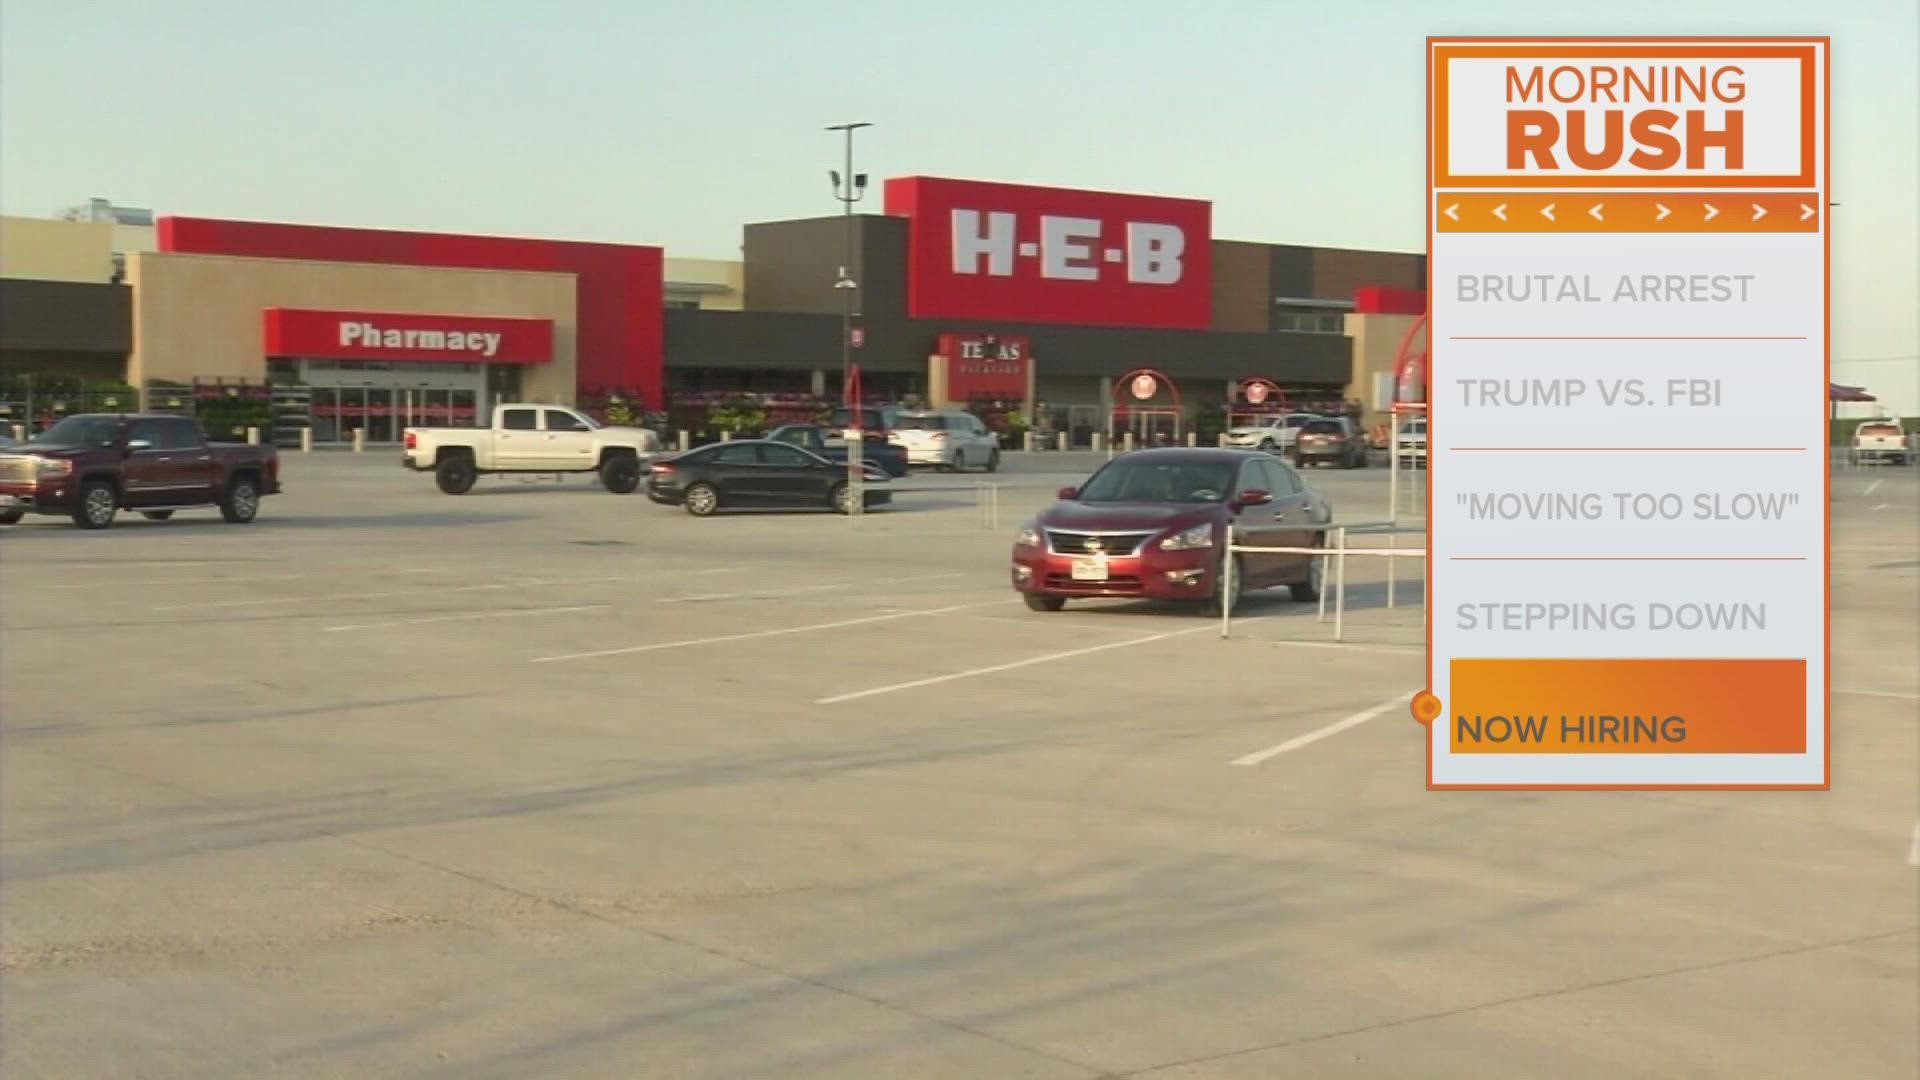 If you're looking for a job, HEB might have work for you.